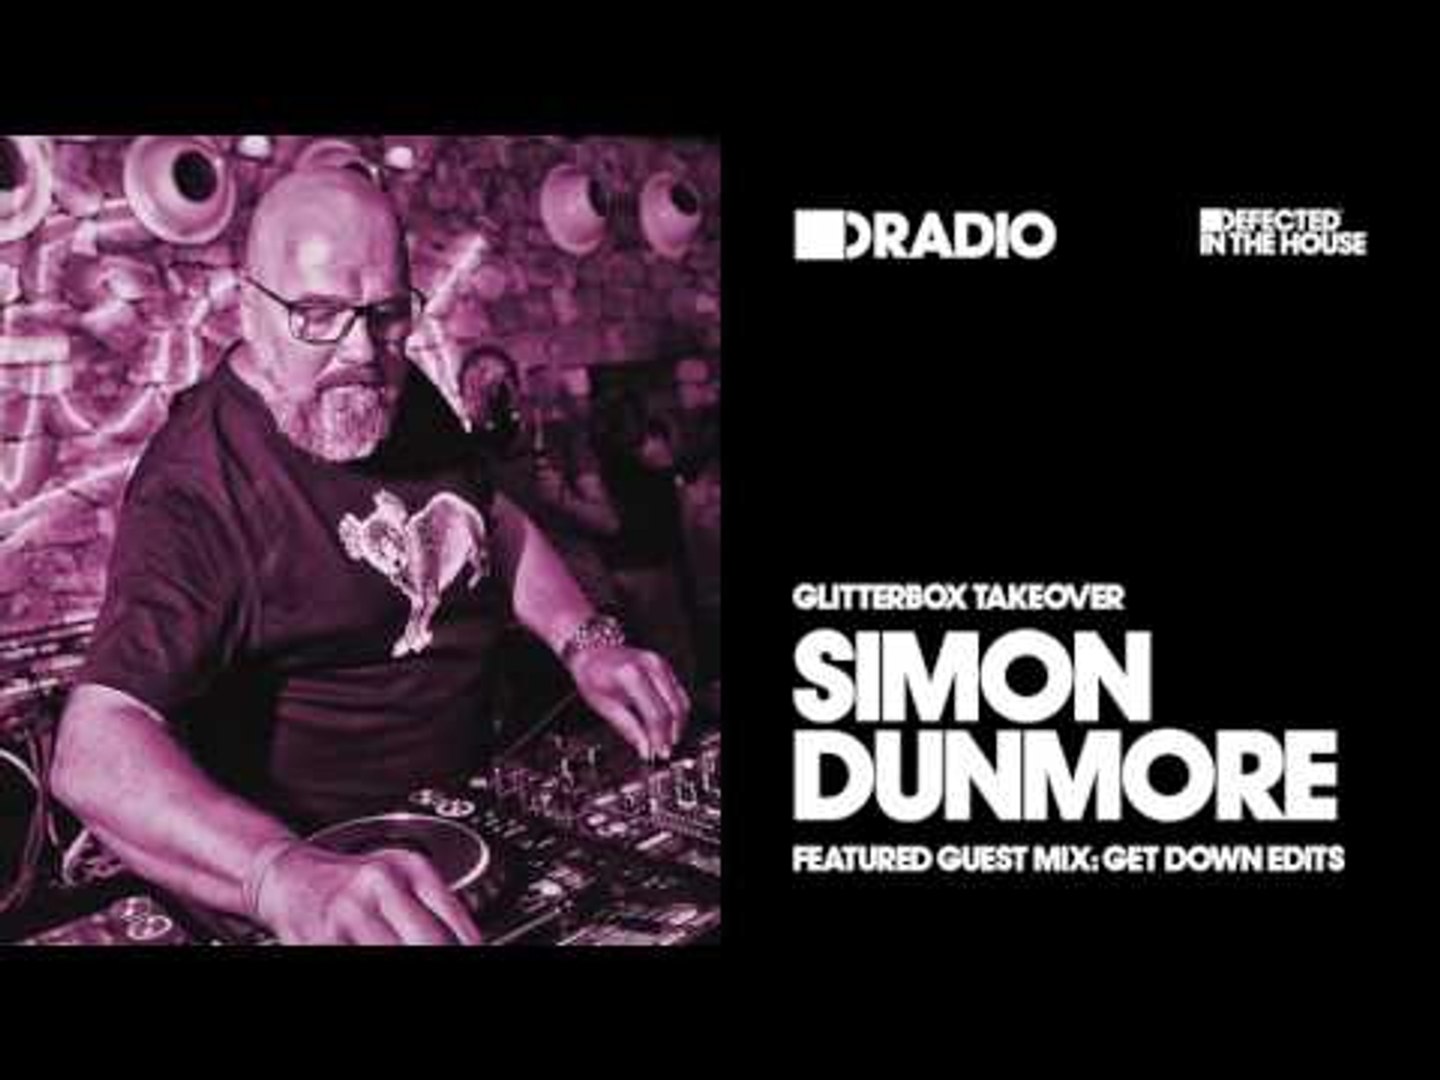 Defected In The House Radio Glitterbox Takeover with Simon Dunmore 11.11.16  Guest Mix Get Down Edits - video Dailymotion